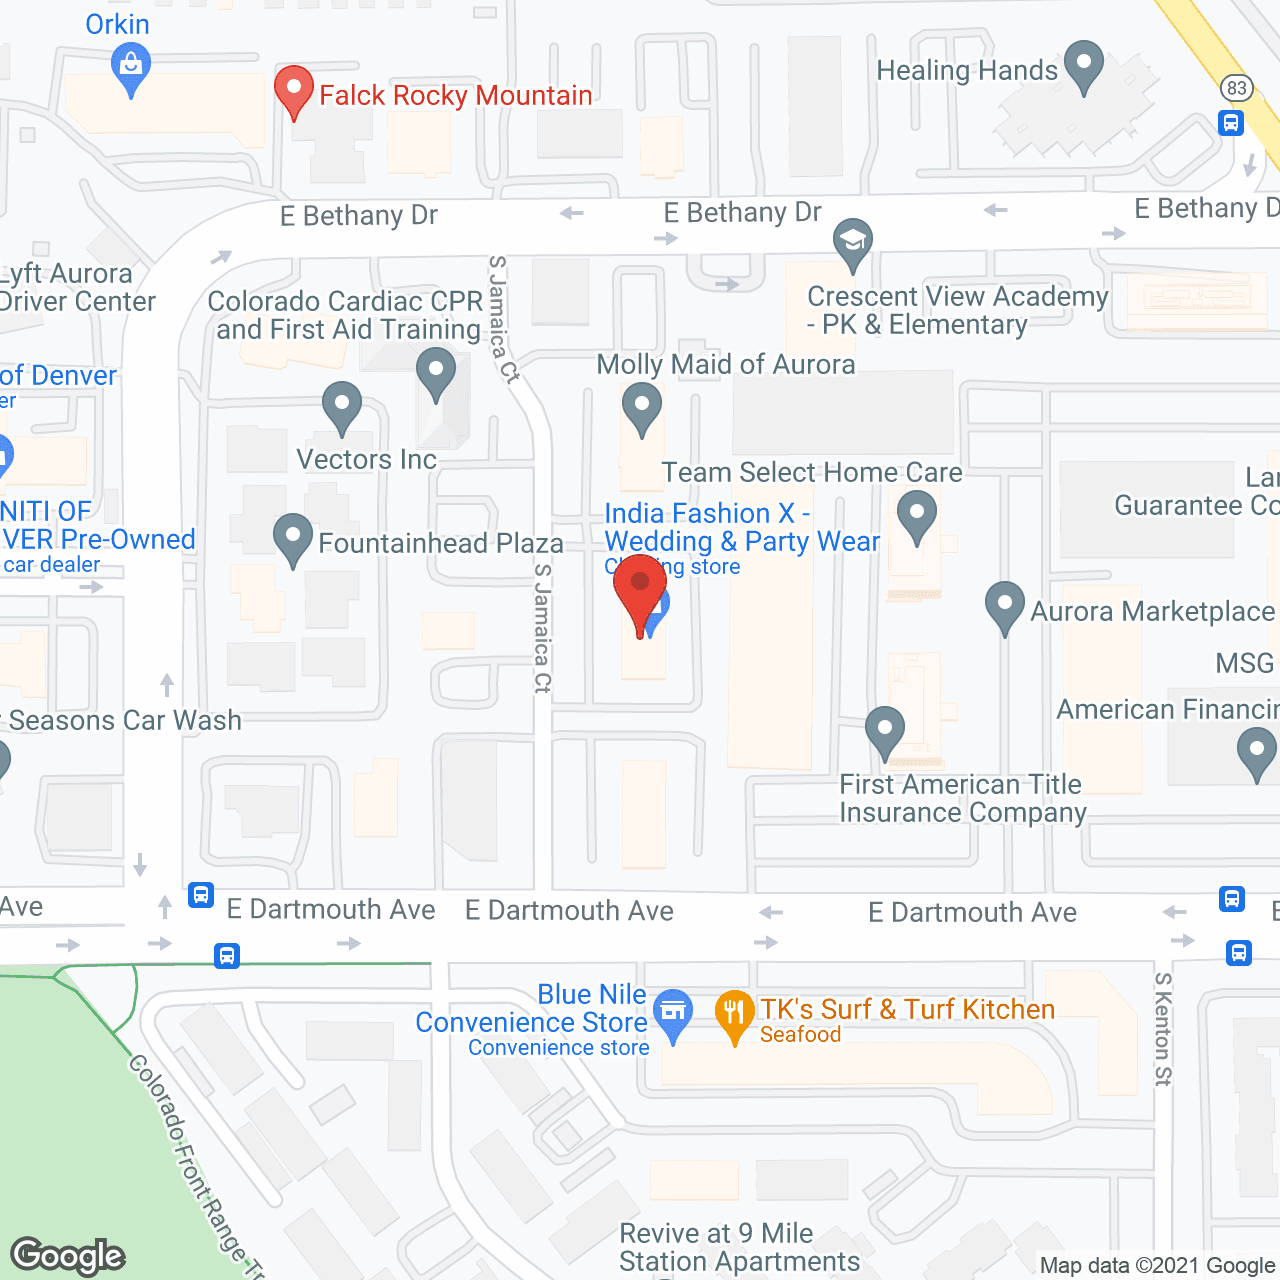 Essential Medical Services Inc. in google map